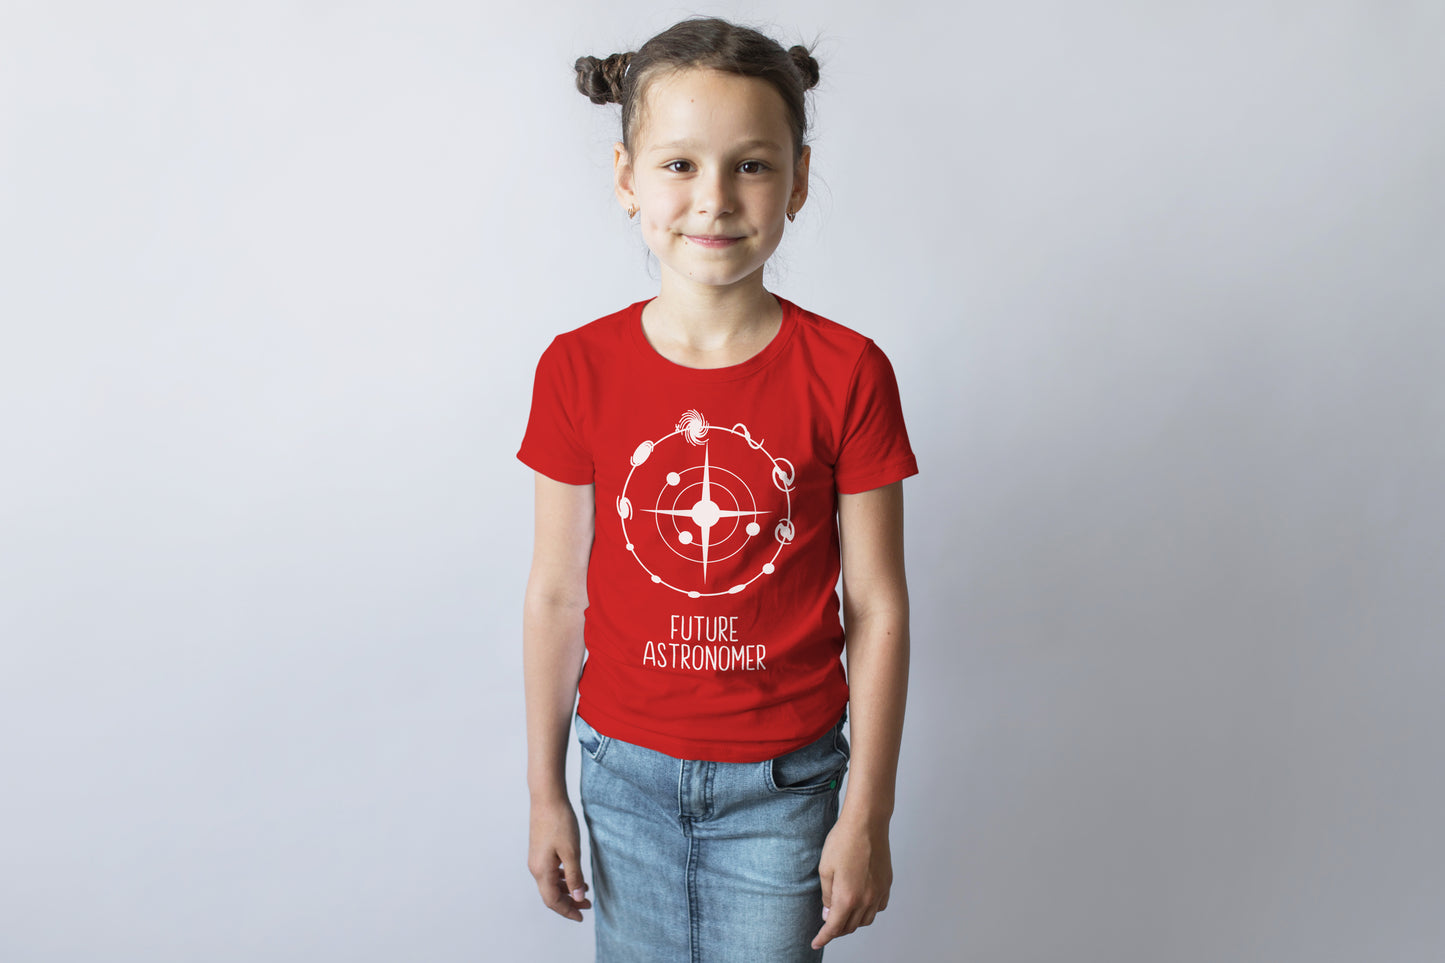 Future Astronomer T-shirt to Inspire Scientists and Gifted Students